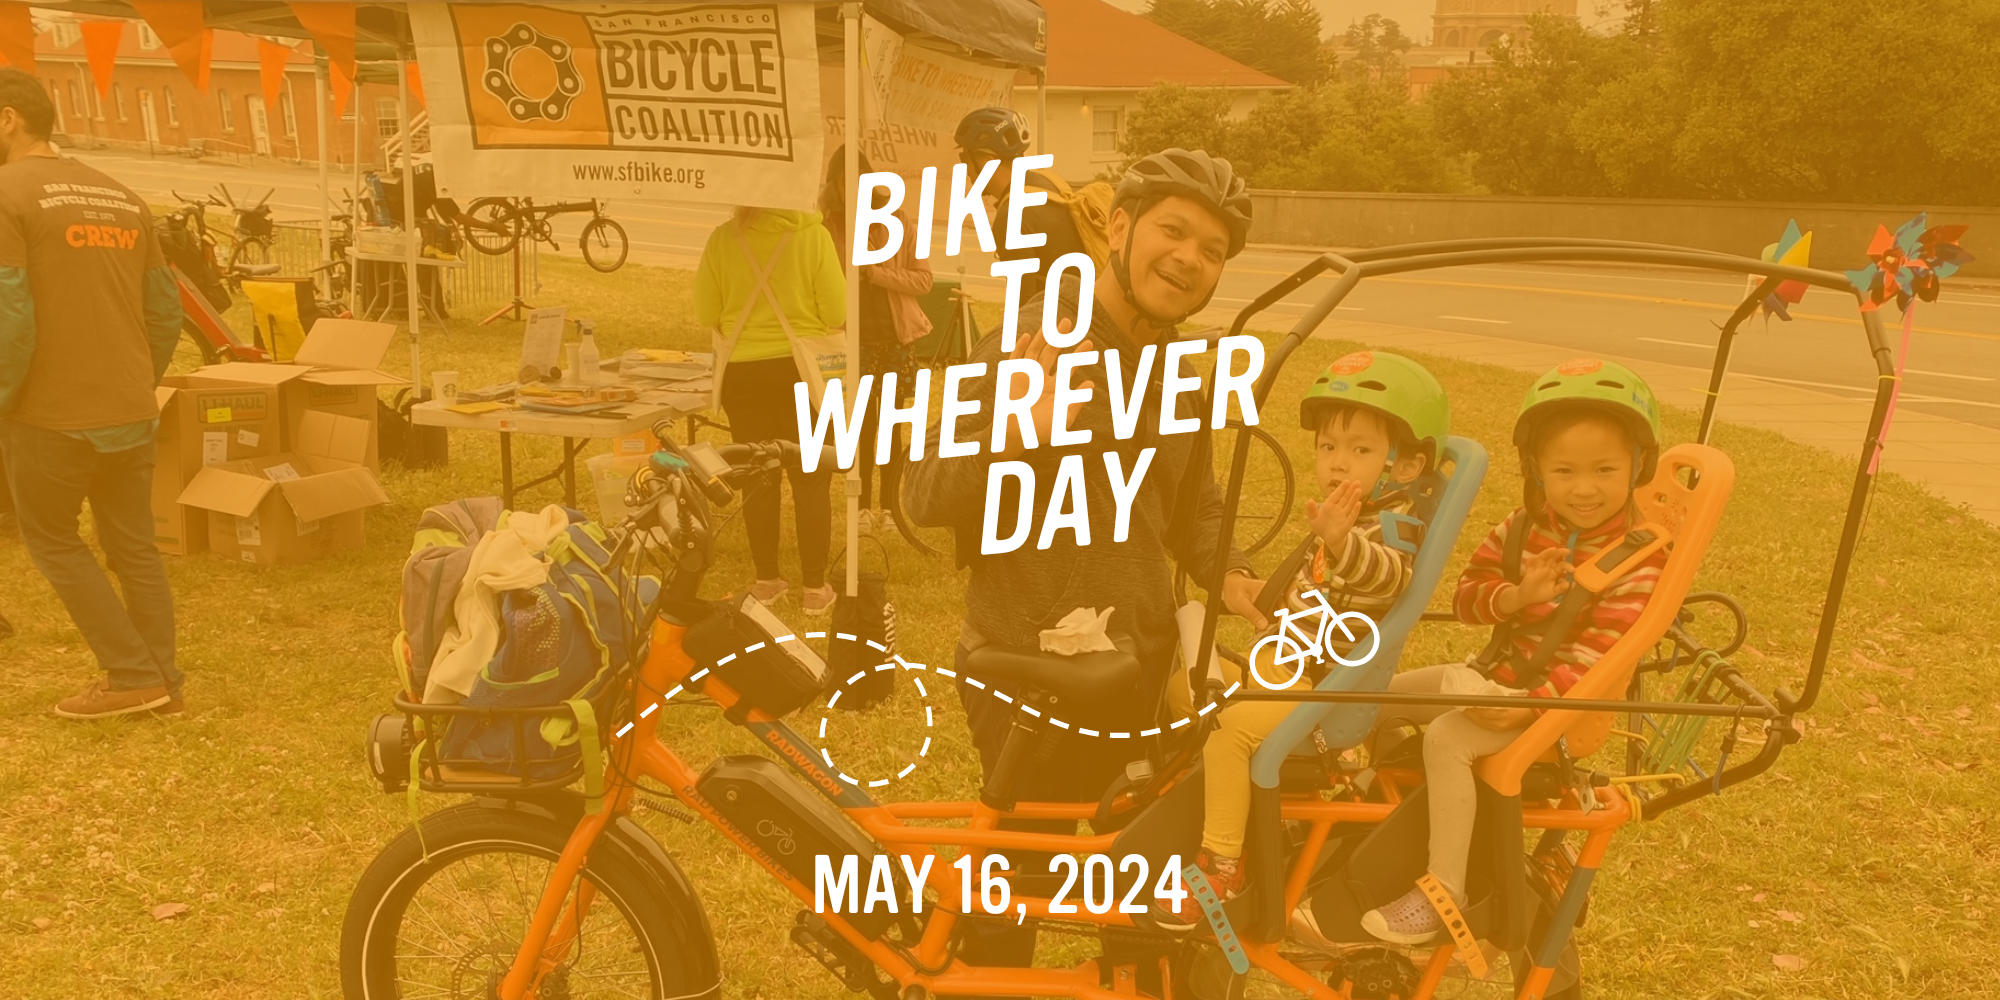 GEAR UP FOR BIKE TO WHEREVER DAY